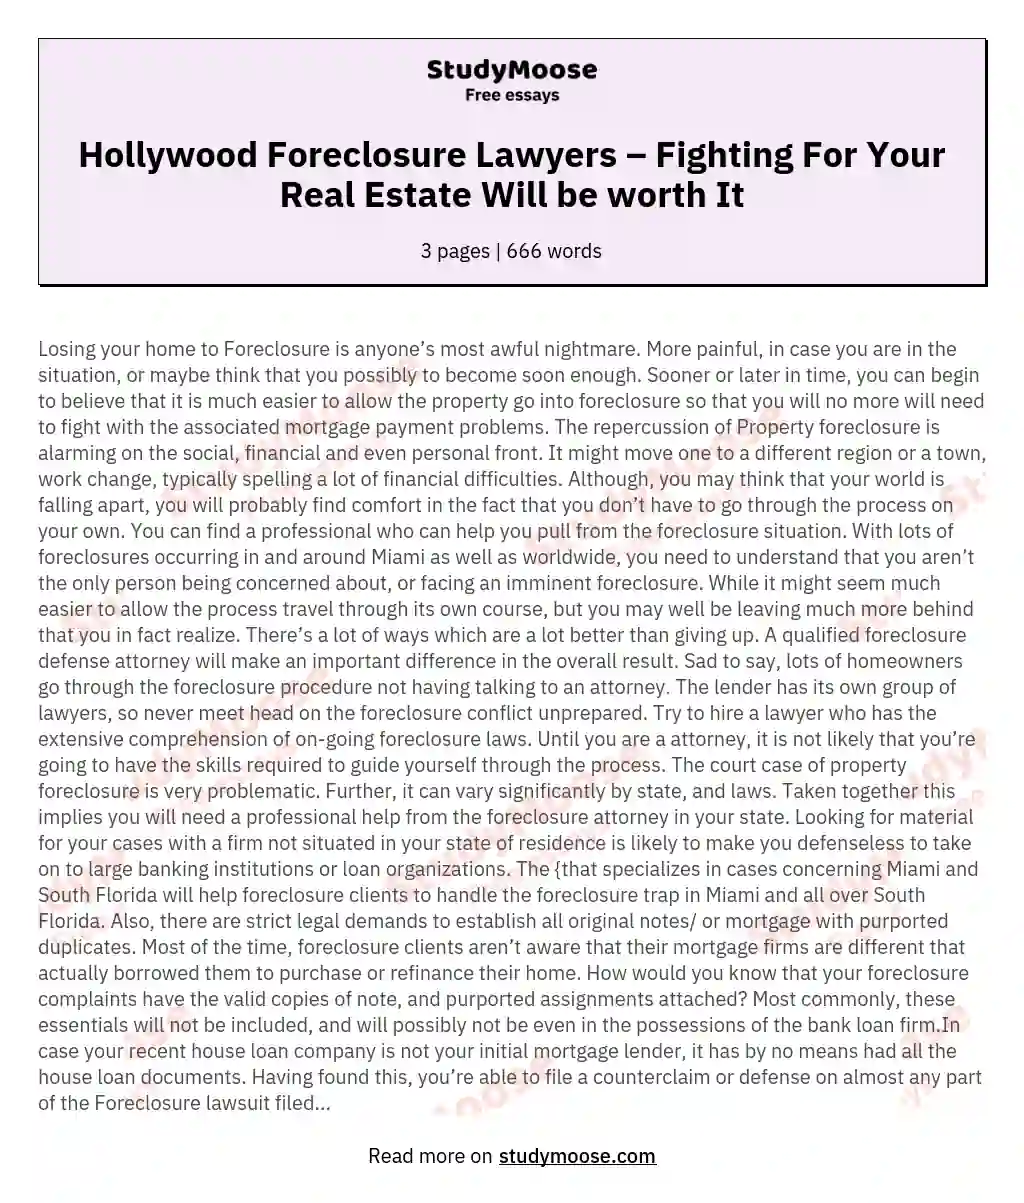 Hollywood Foreclosure Lawyers – Fighting For Your Real Estate Will be worth It